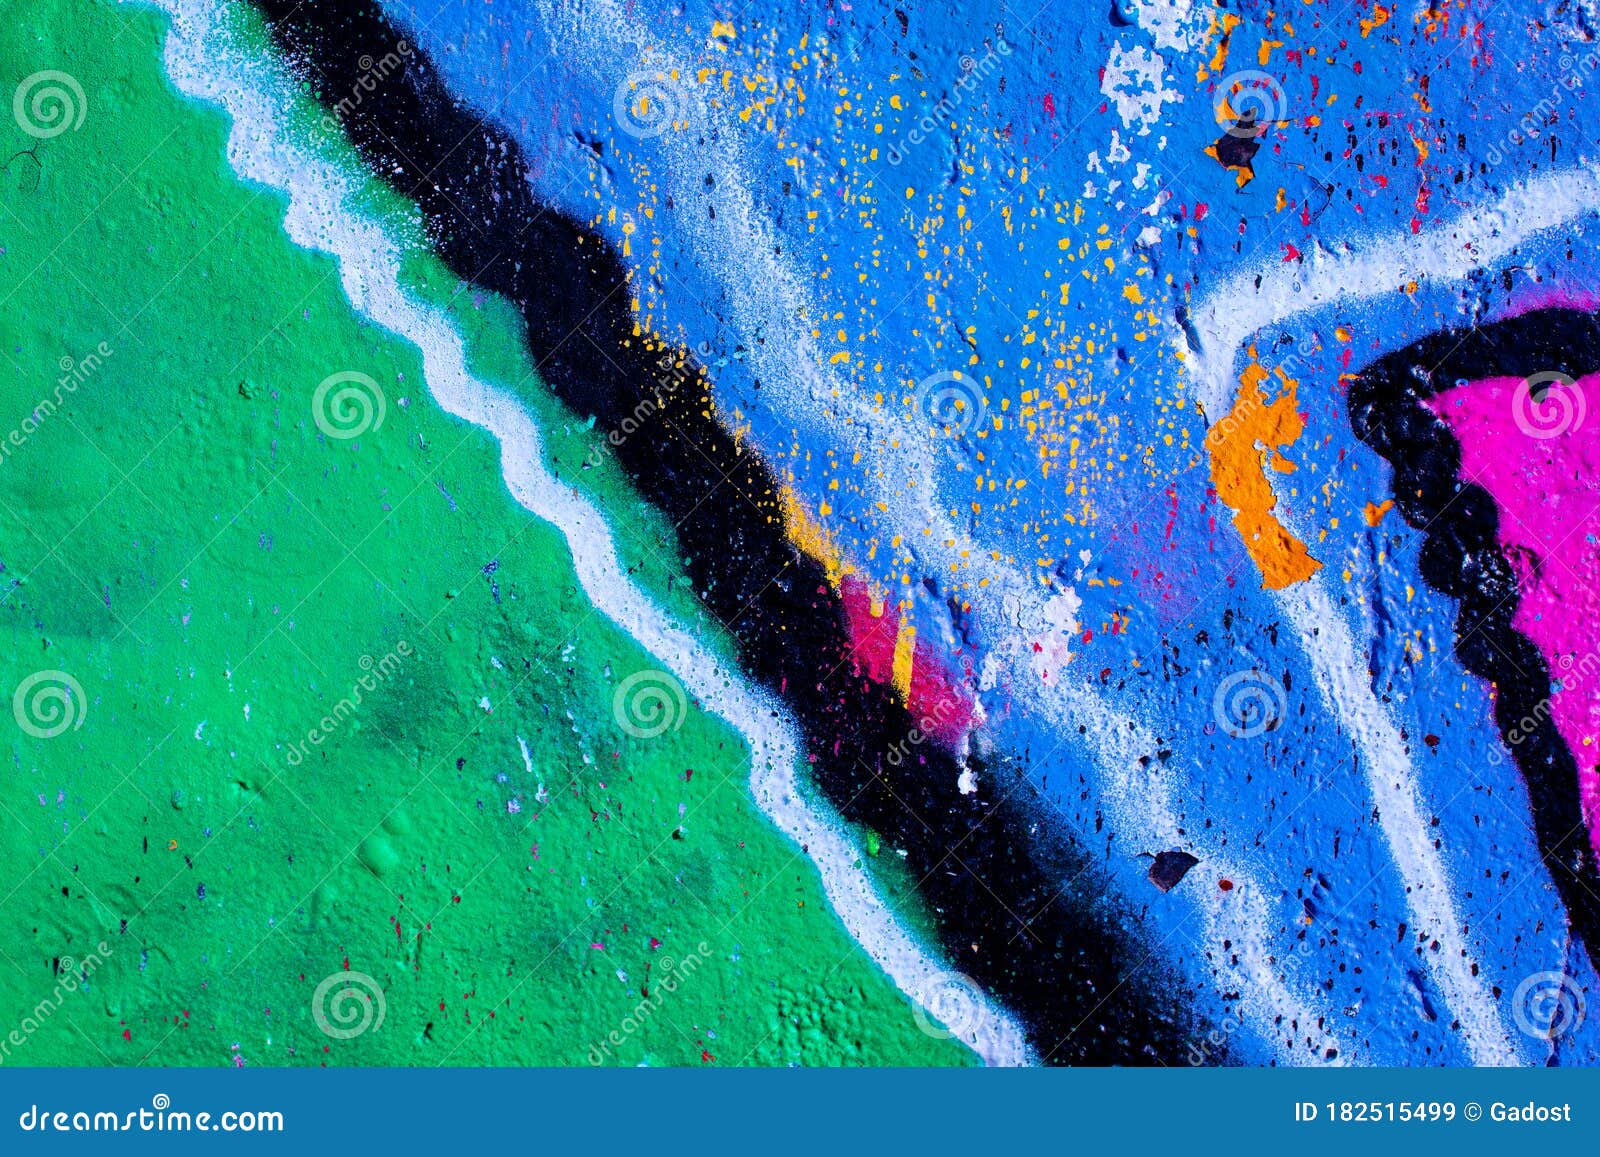 Close Up of Colorful Urban Wall Texture Stock Image - Image of bright ...